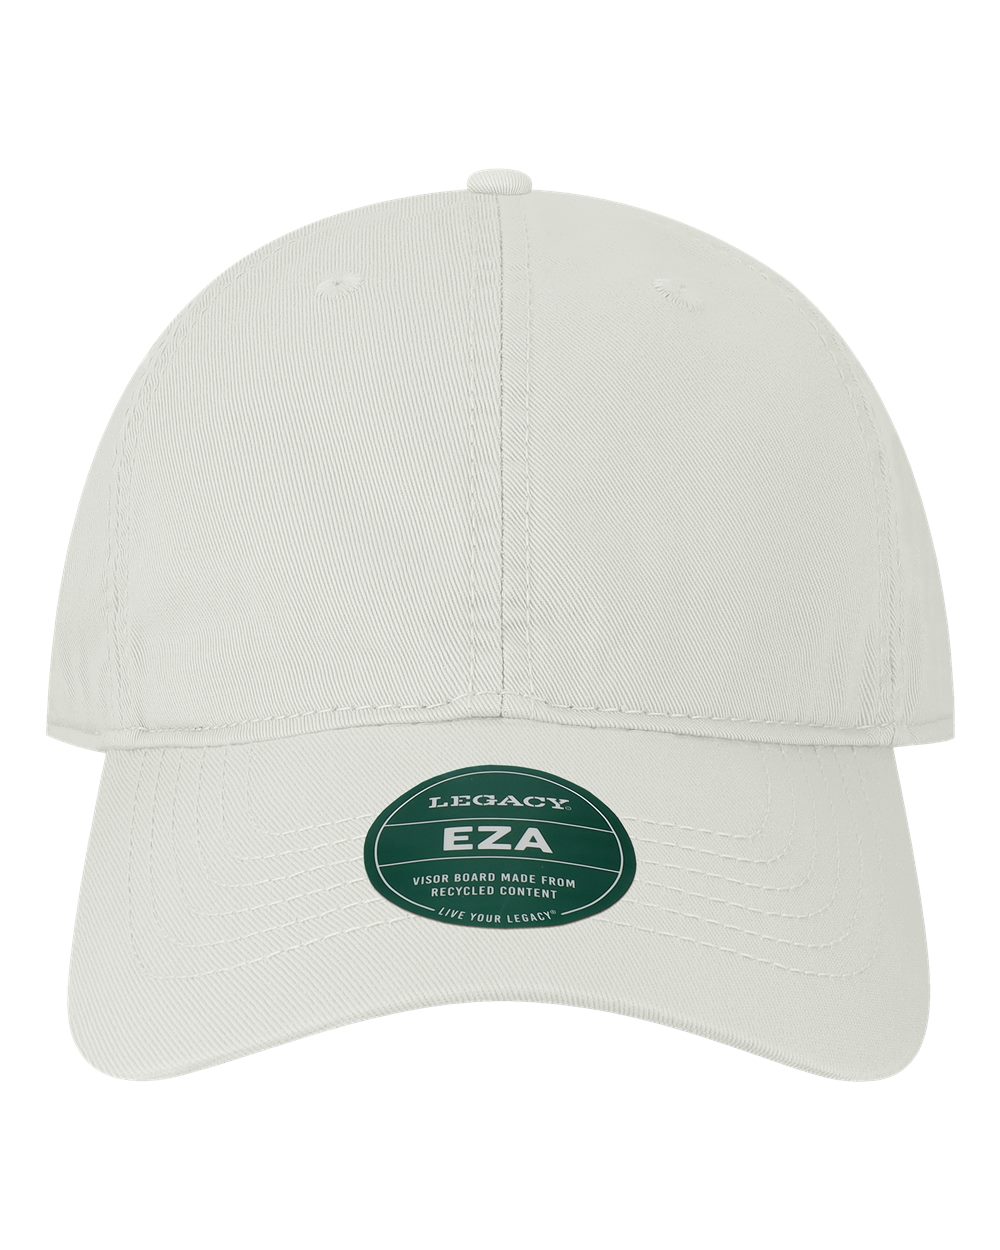 Relaxed Twill LEGACY Shop EZA Online Hat - Dad Clothing 